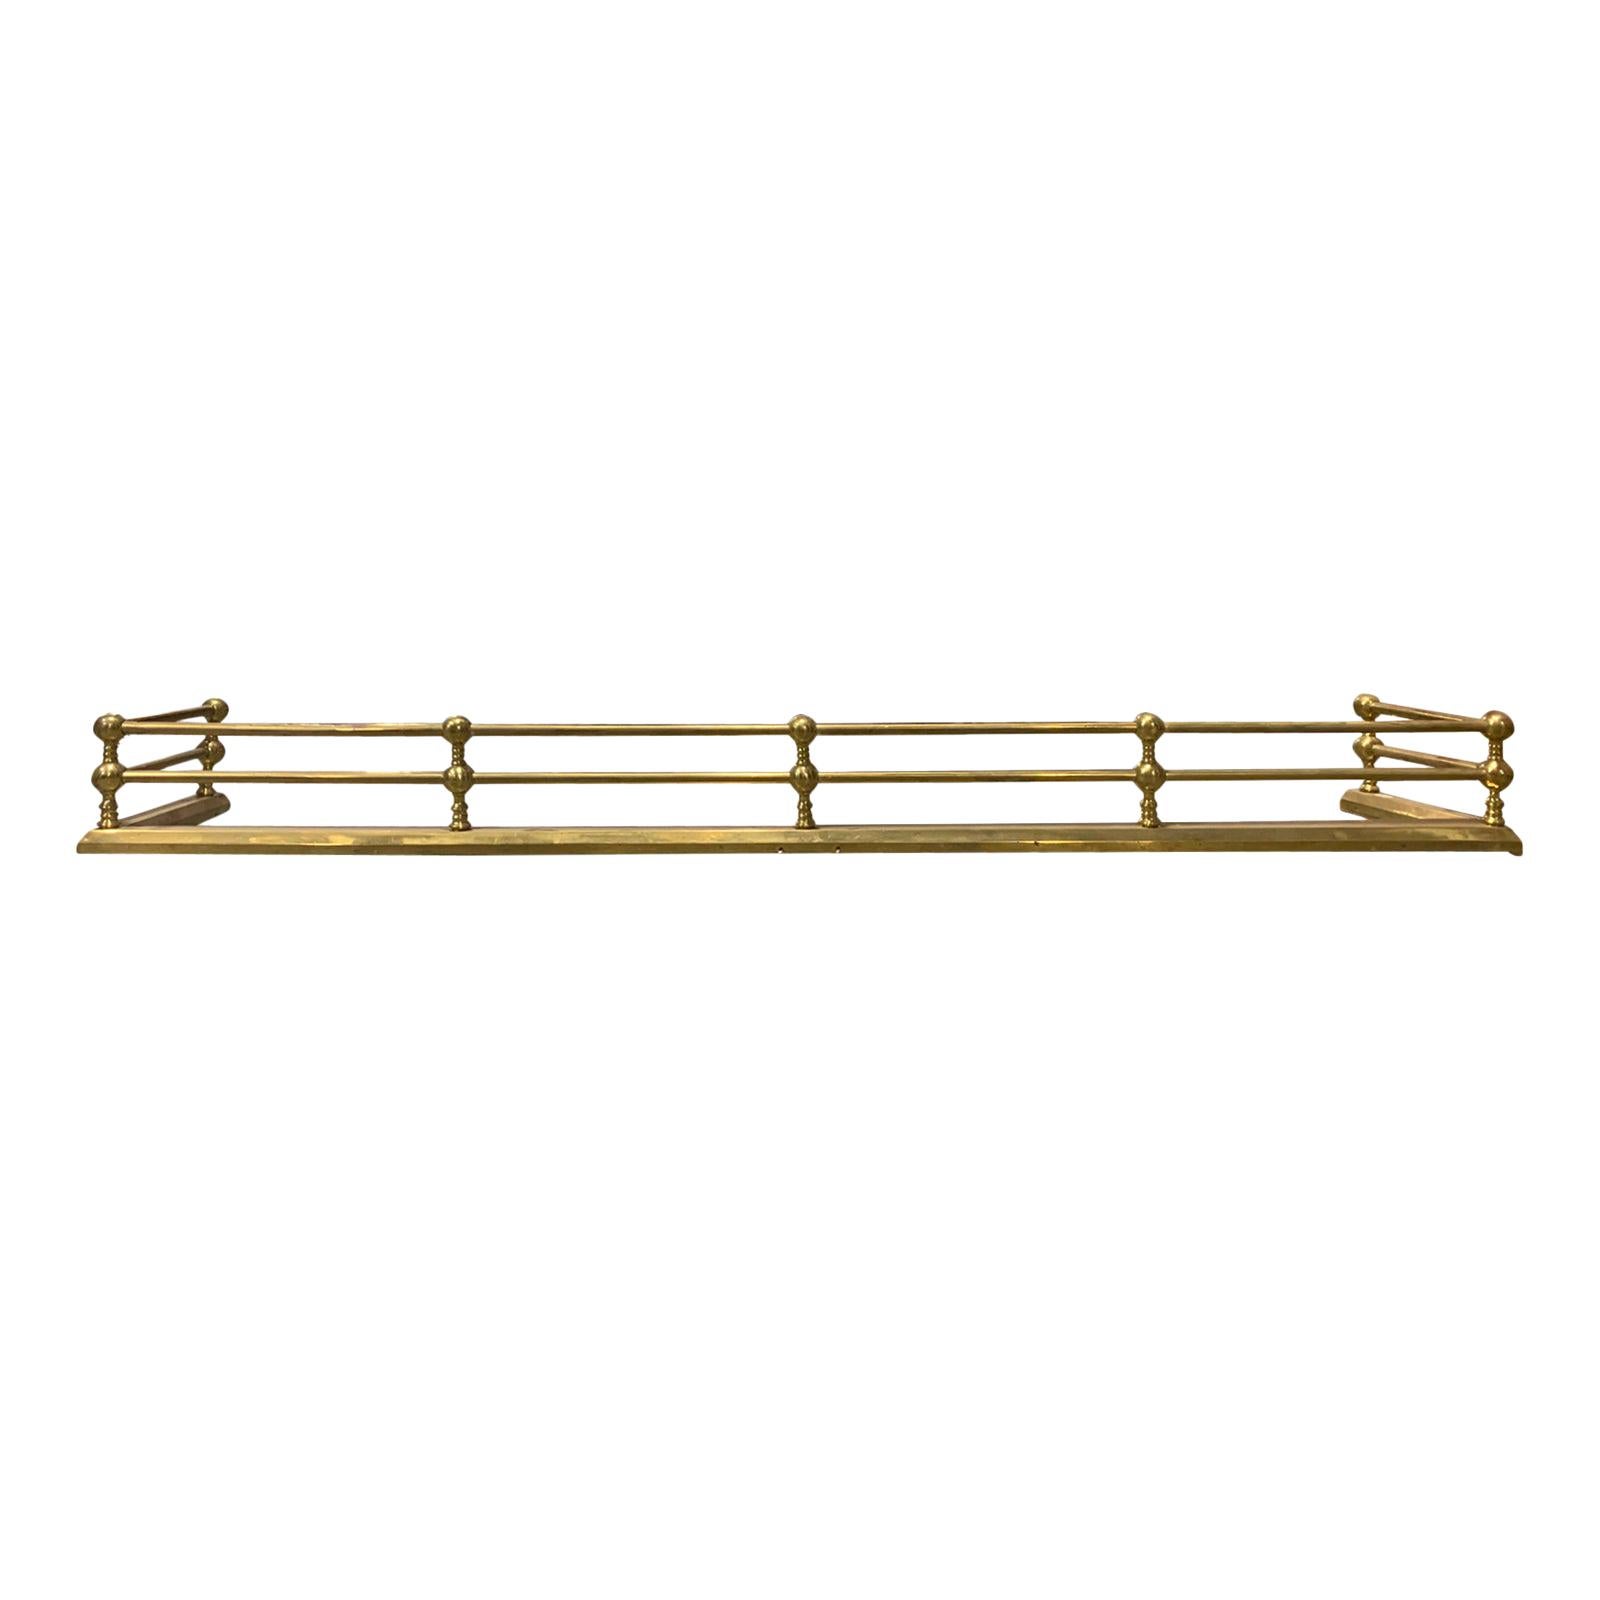 Early 20th Century Art Deco Brass Fireplace Fender, Large Scale For Sale